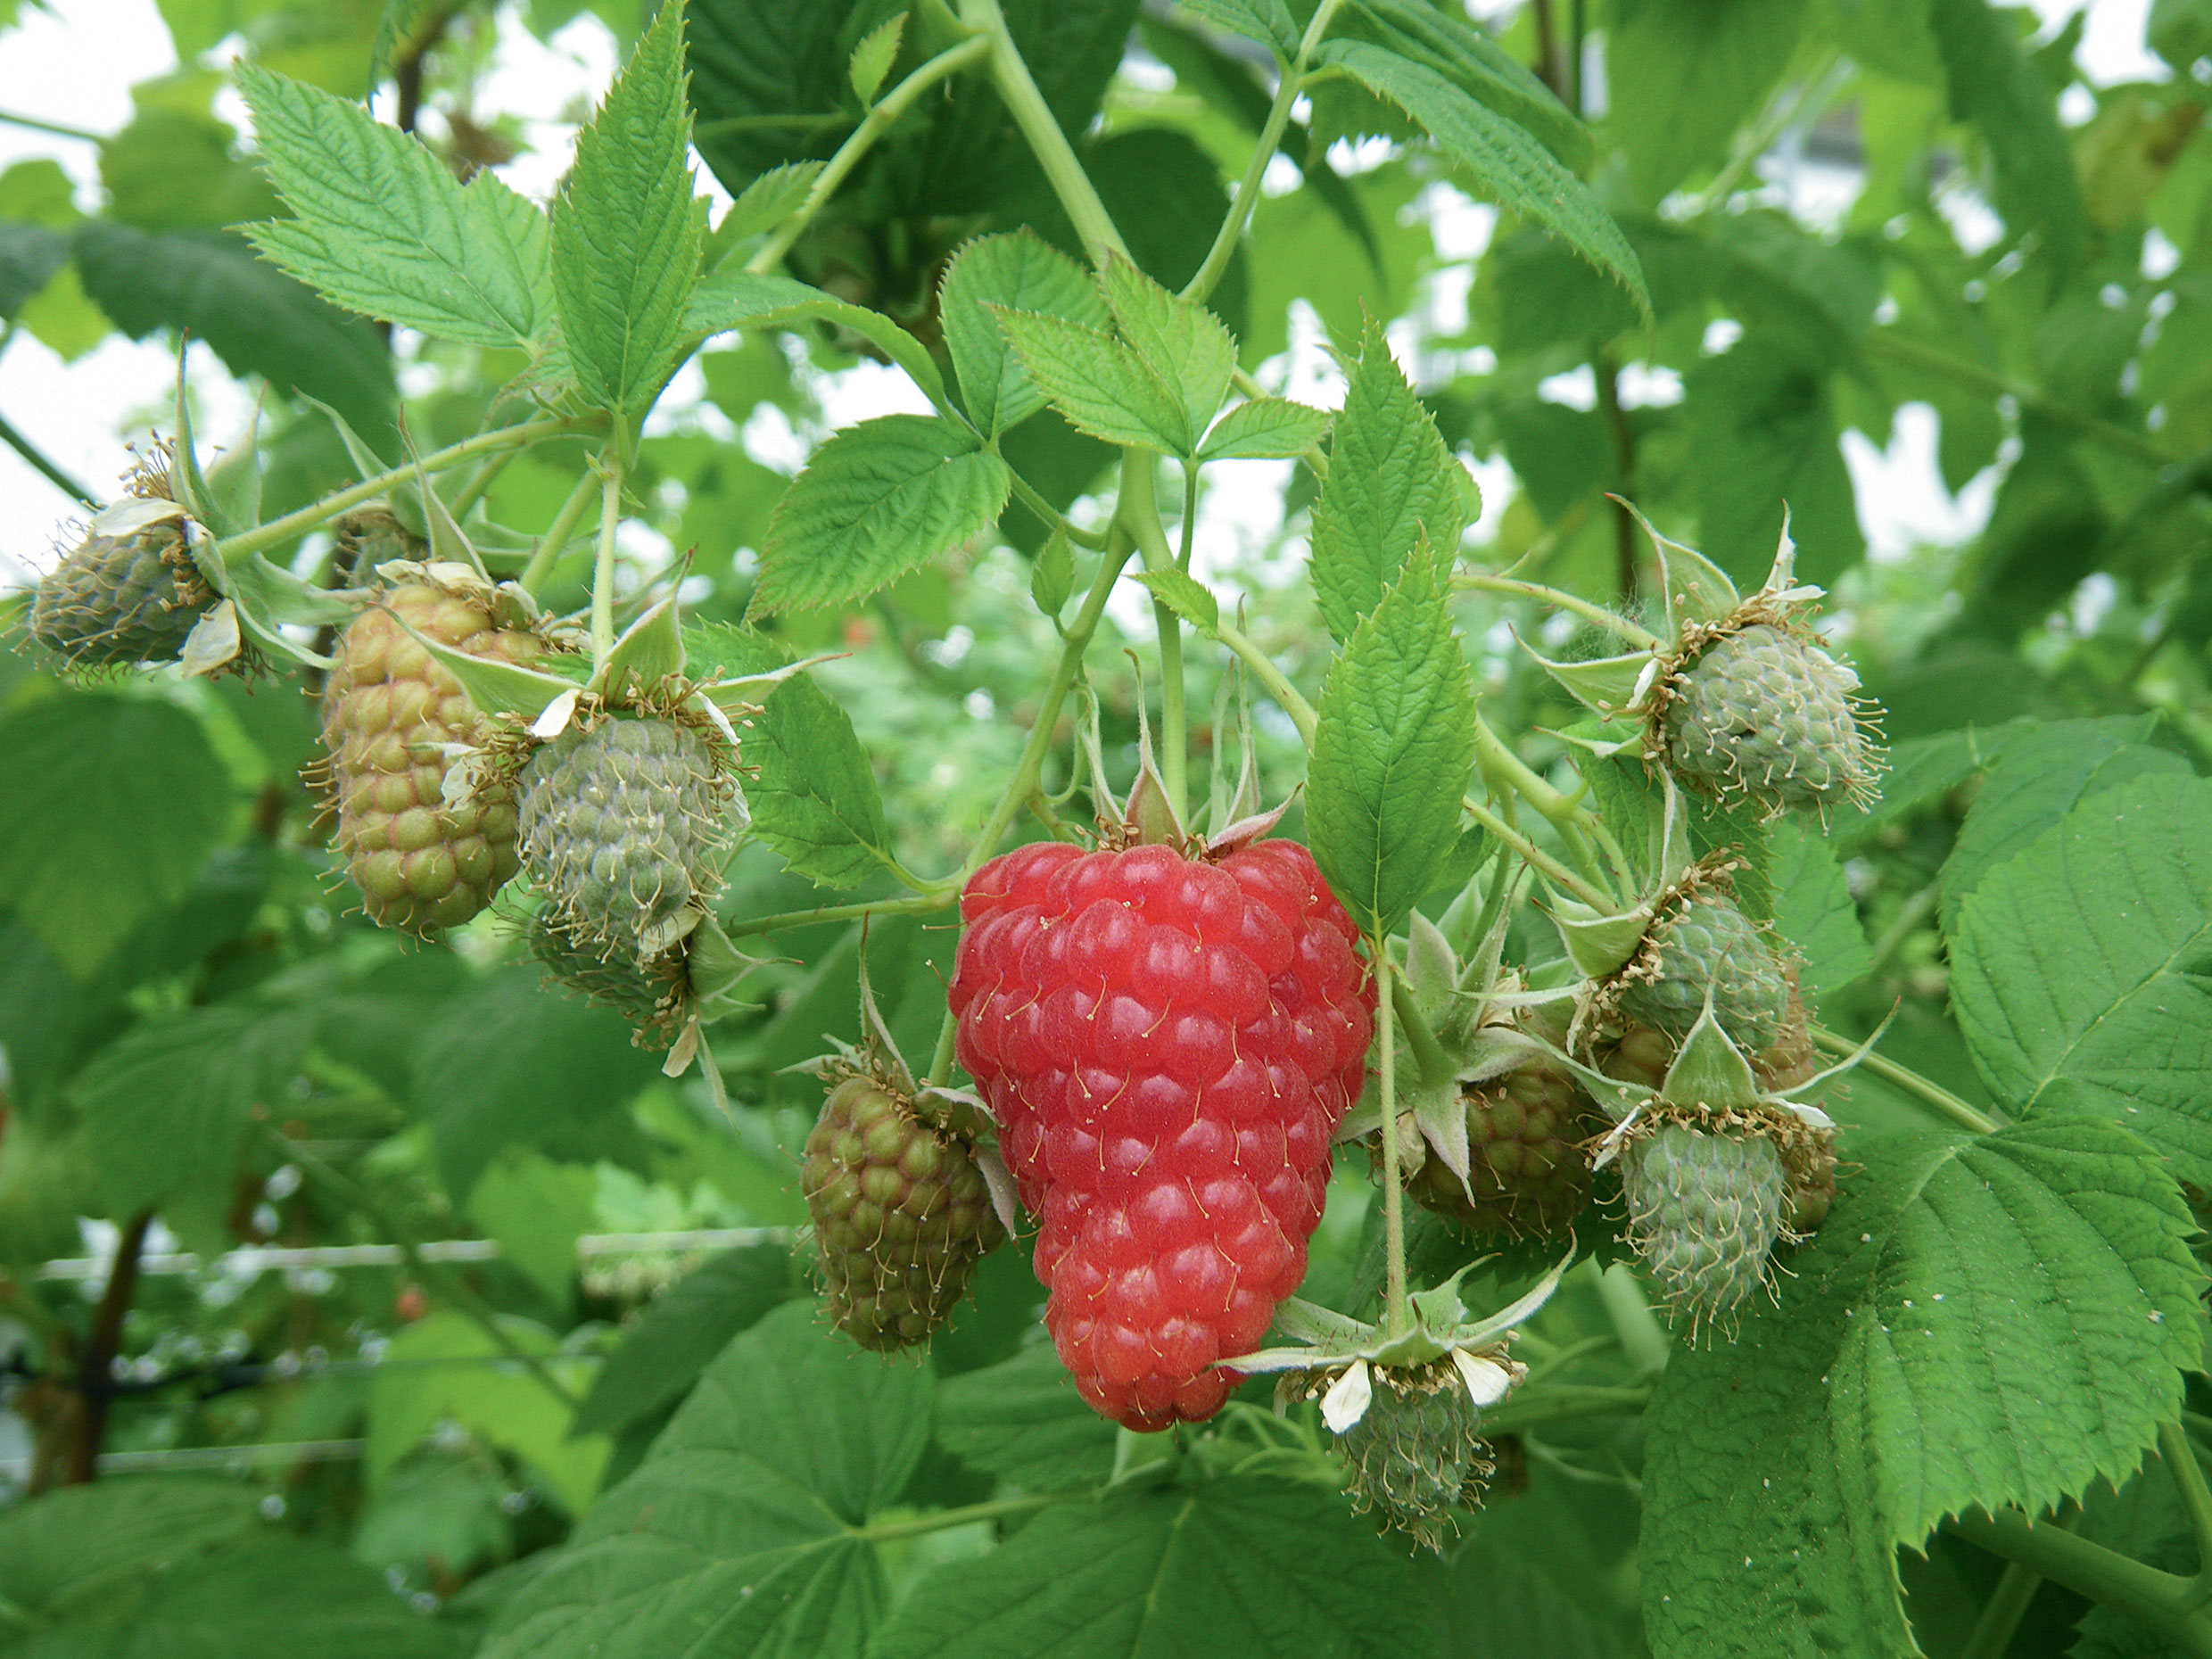 Raspberry production on substrate: Influence of pot volume and substrate